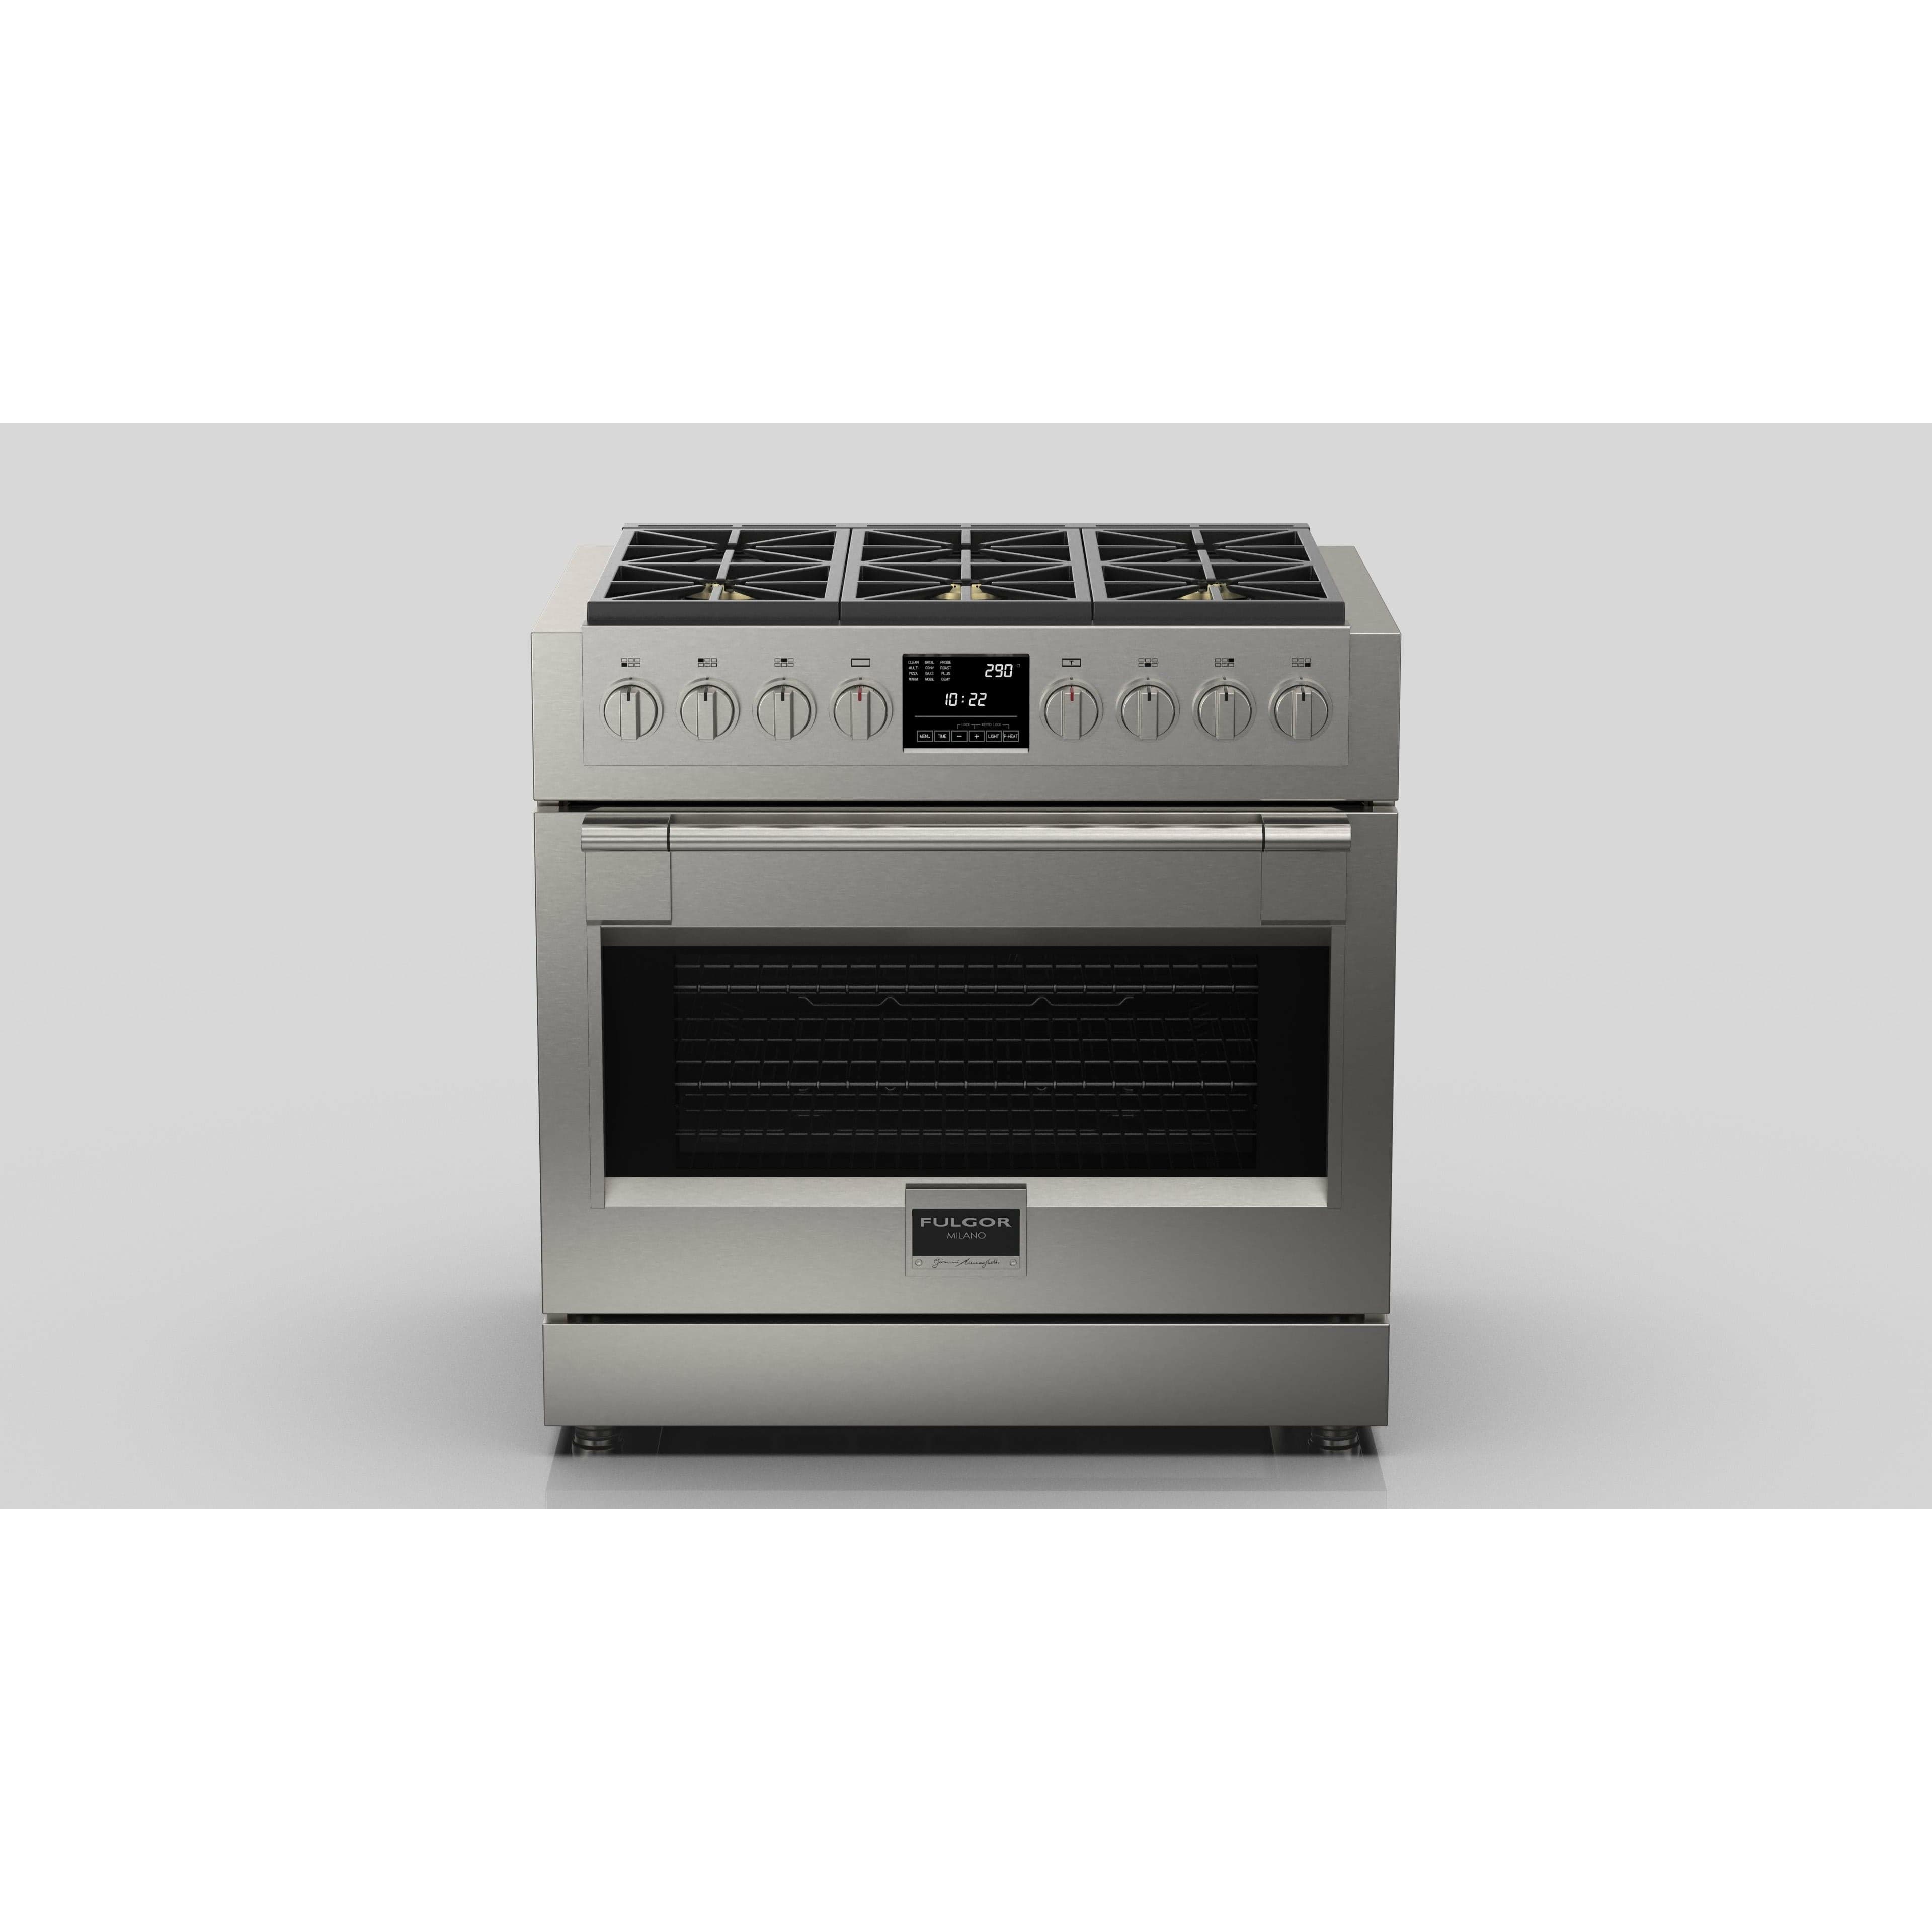 Fulgor Milano Package - 36" Dual Fuel Range, 36" French Door Refrigerator, 24" Built-In Dishwasher and 36" Wall Range Hood - F6PDF366S1F6FBM36S2 Ranges F6PDF366S1F6FBM36S2 Luxury Appliances Direct